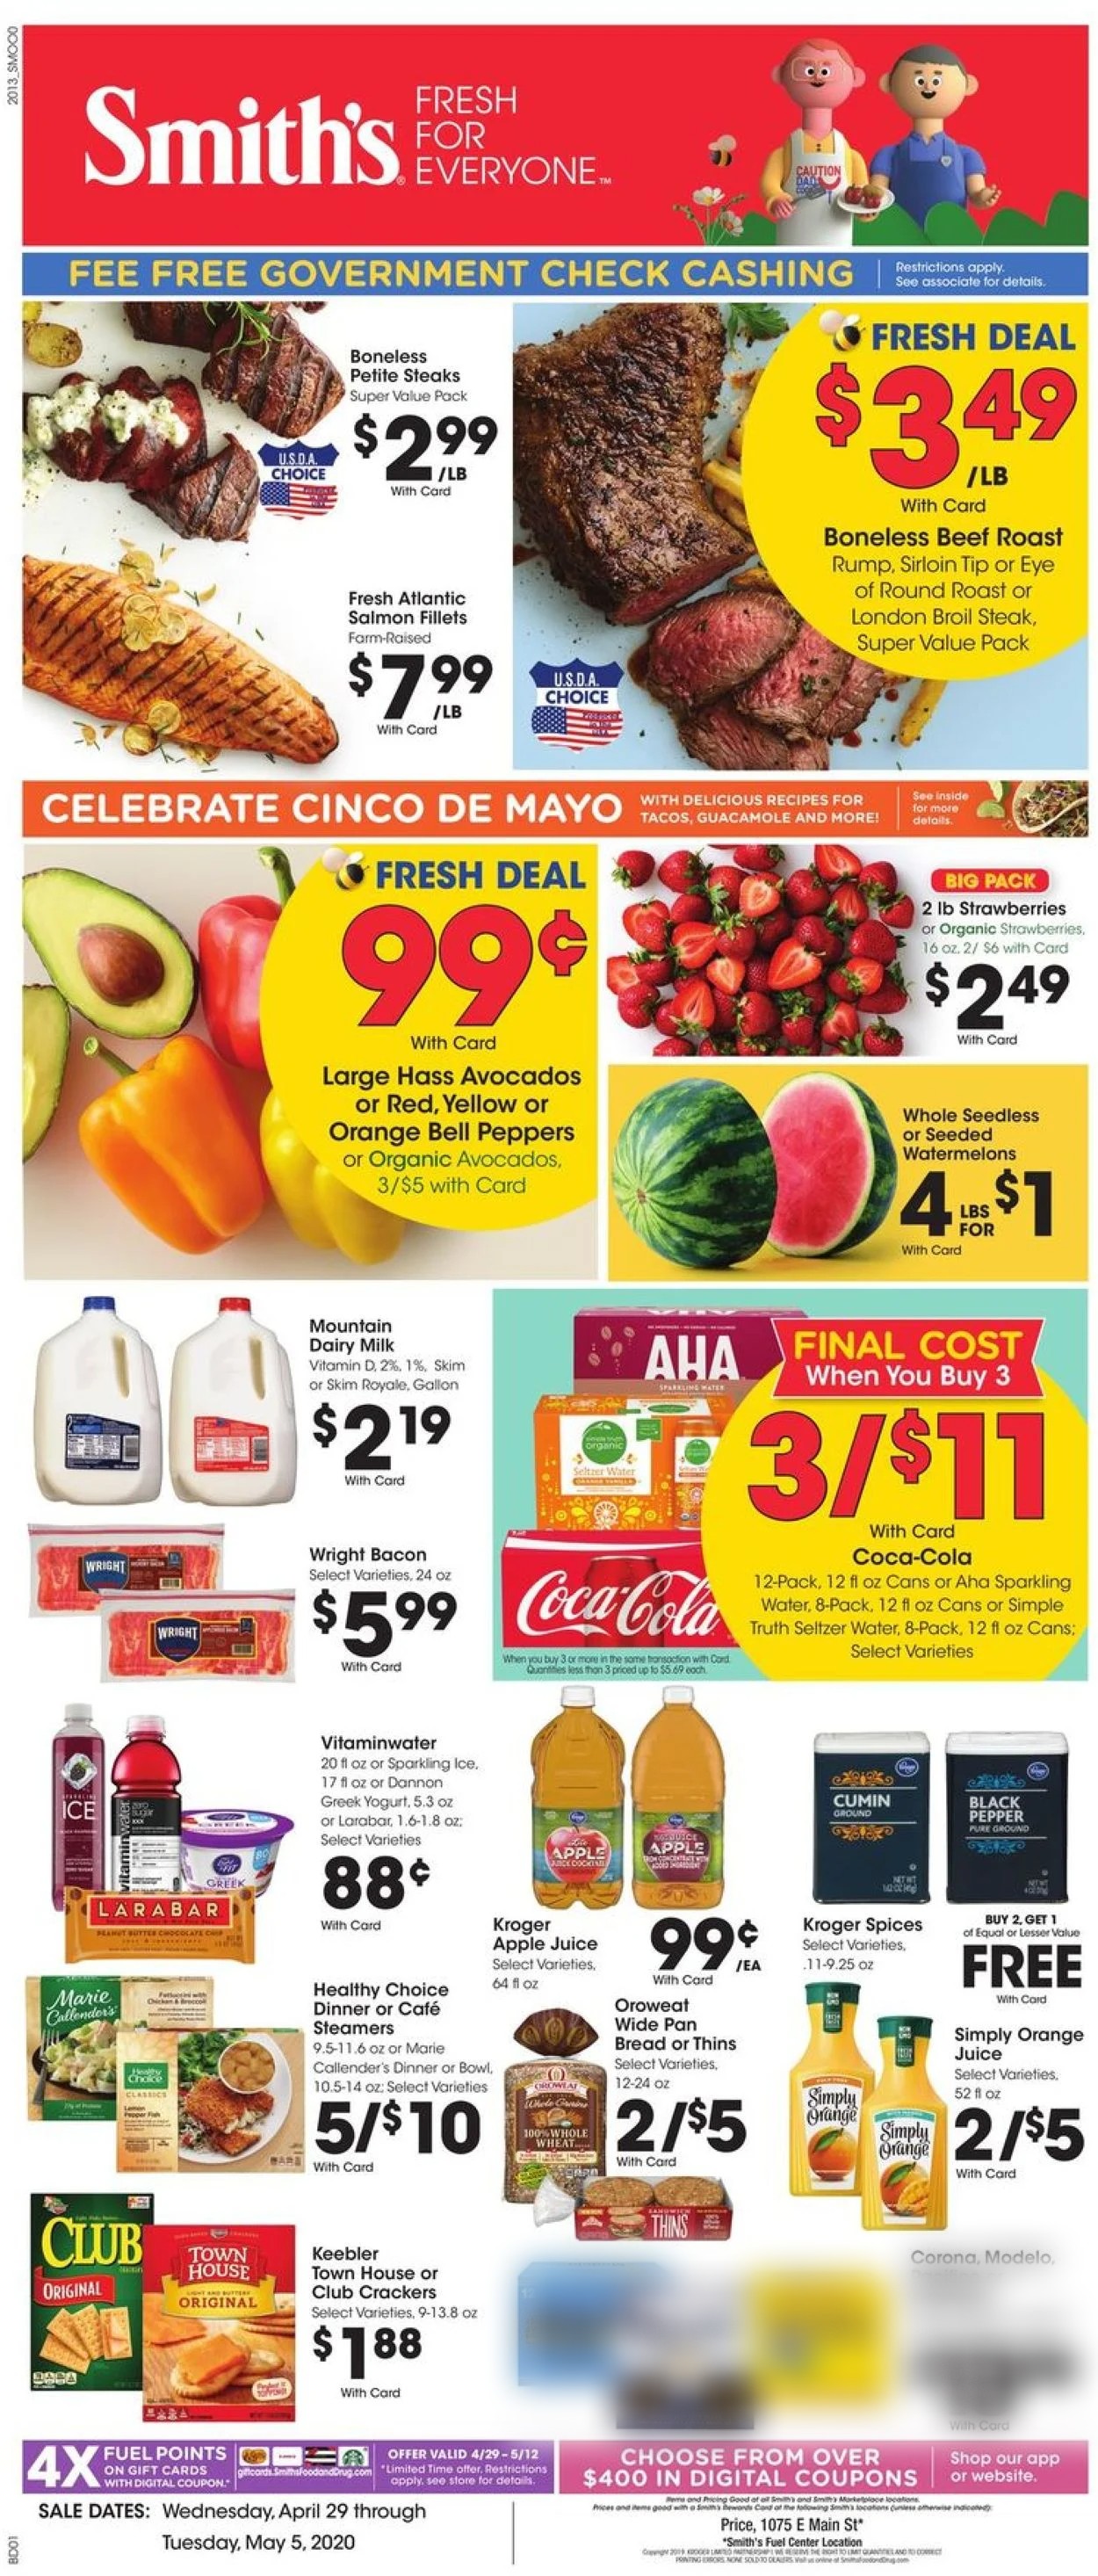 Smith's Current weekly ad 04/29 - 05/05/2020 - frequent-ads.com